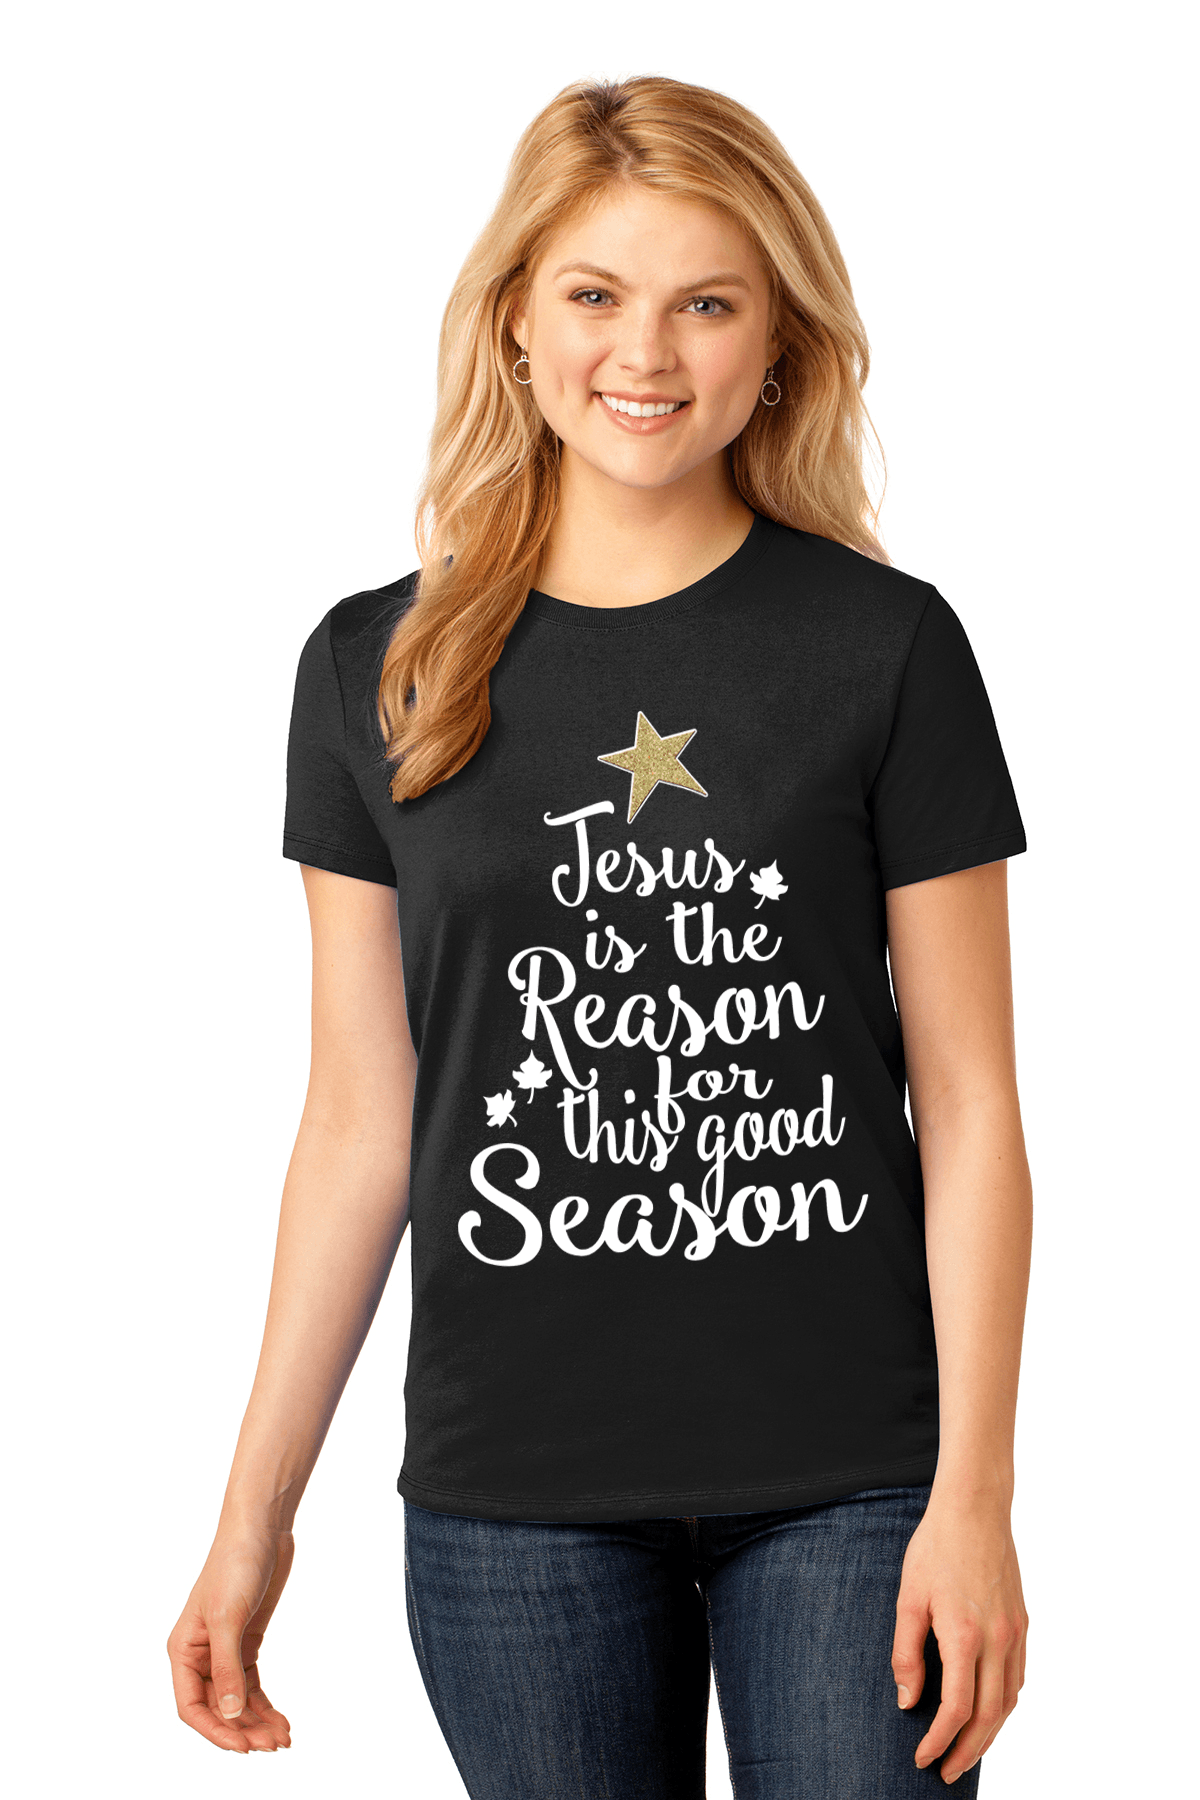 "Jesus is the Reason For this Good Season"